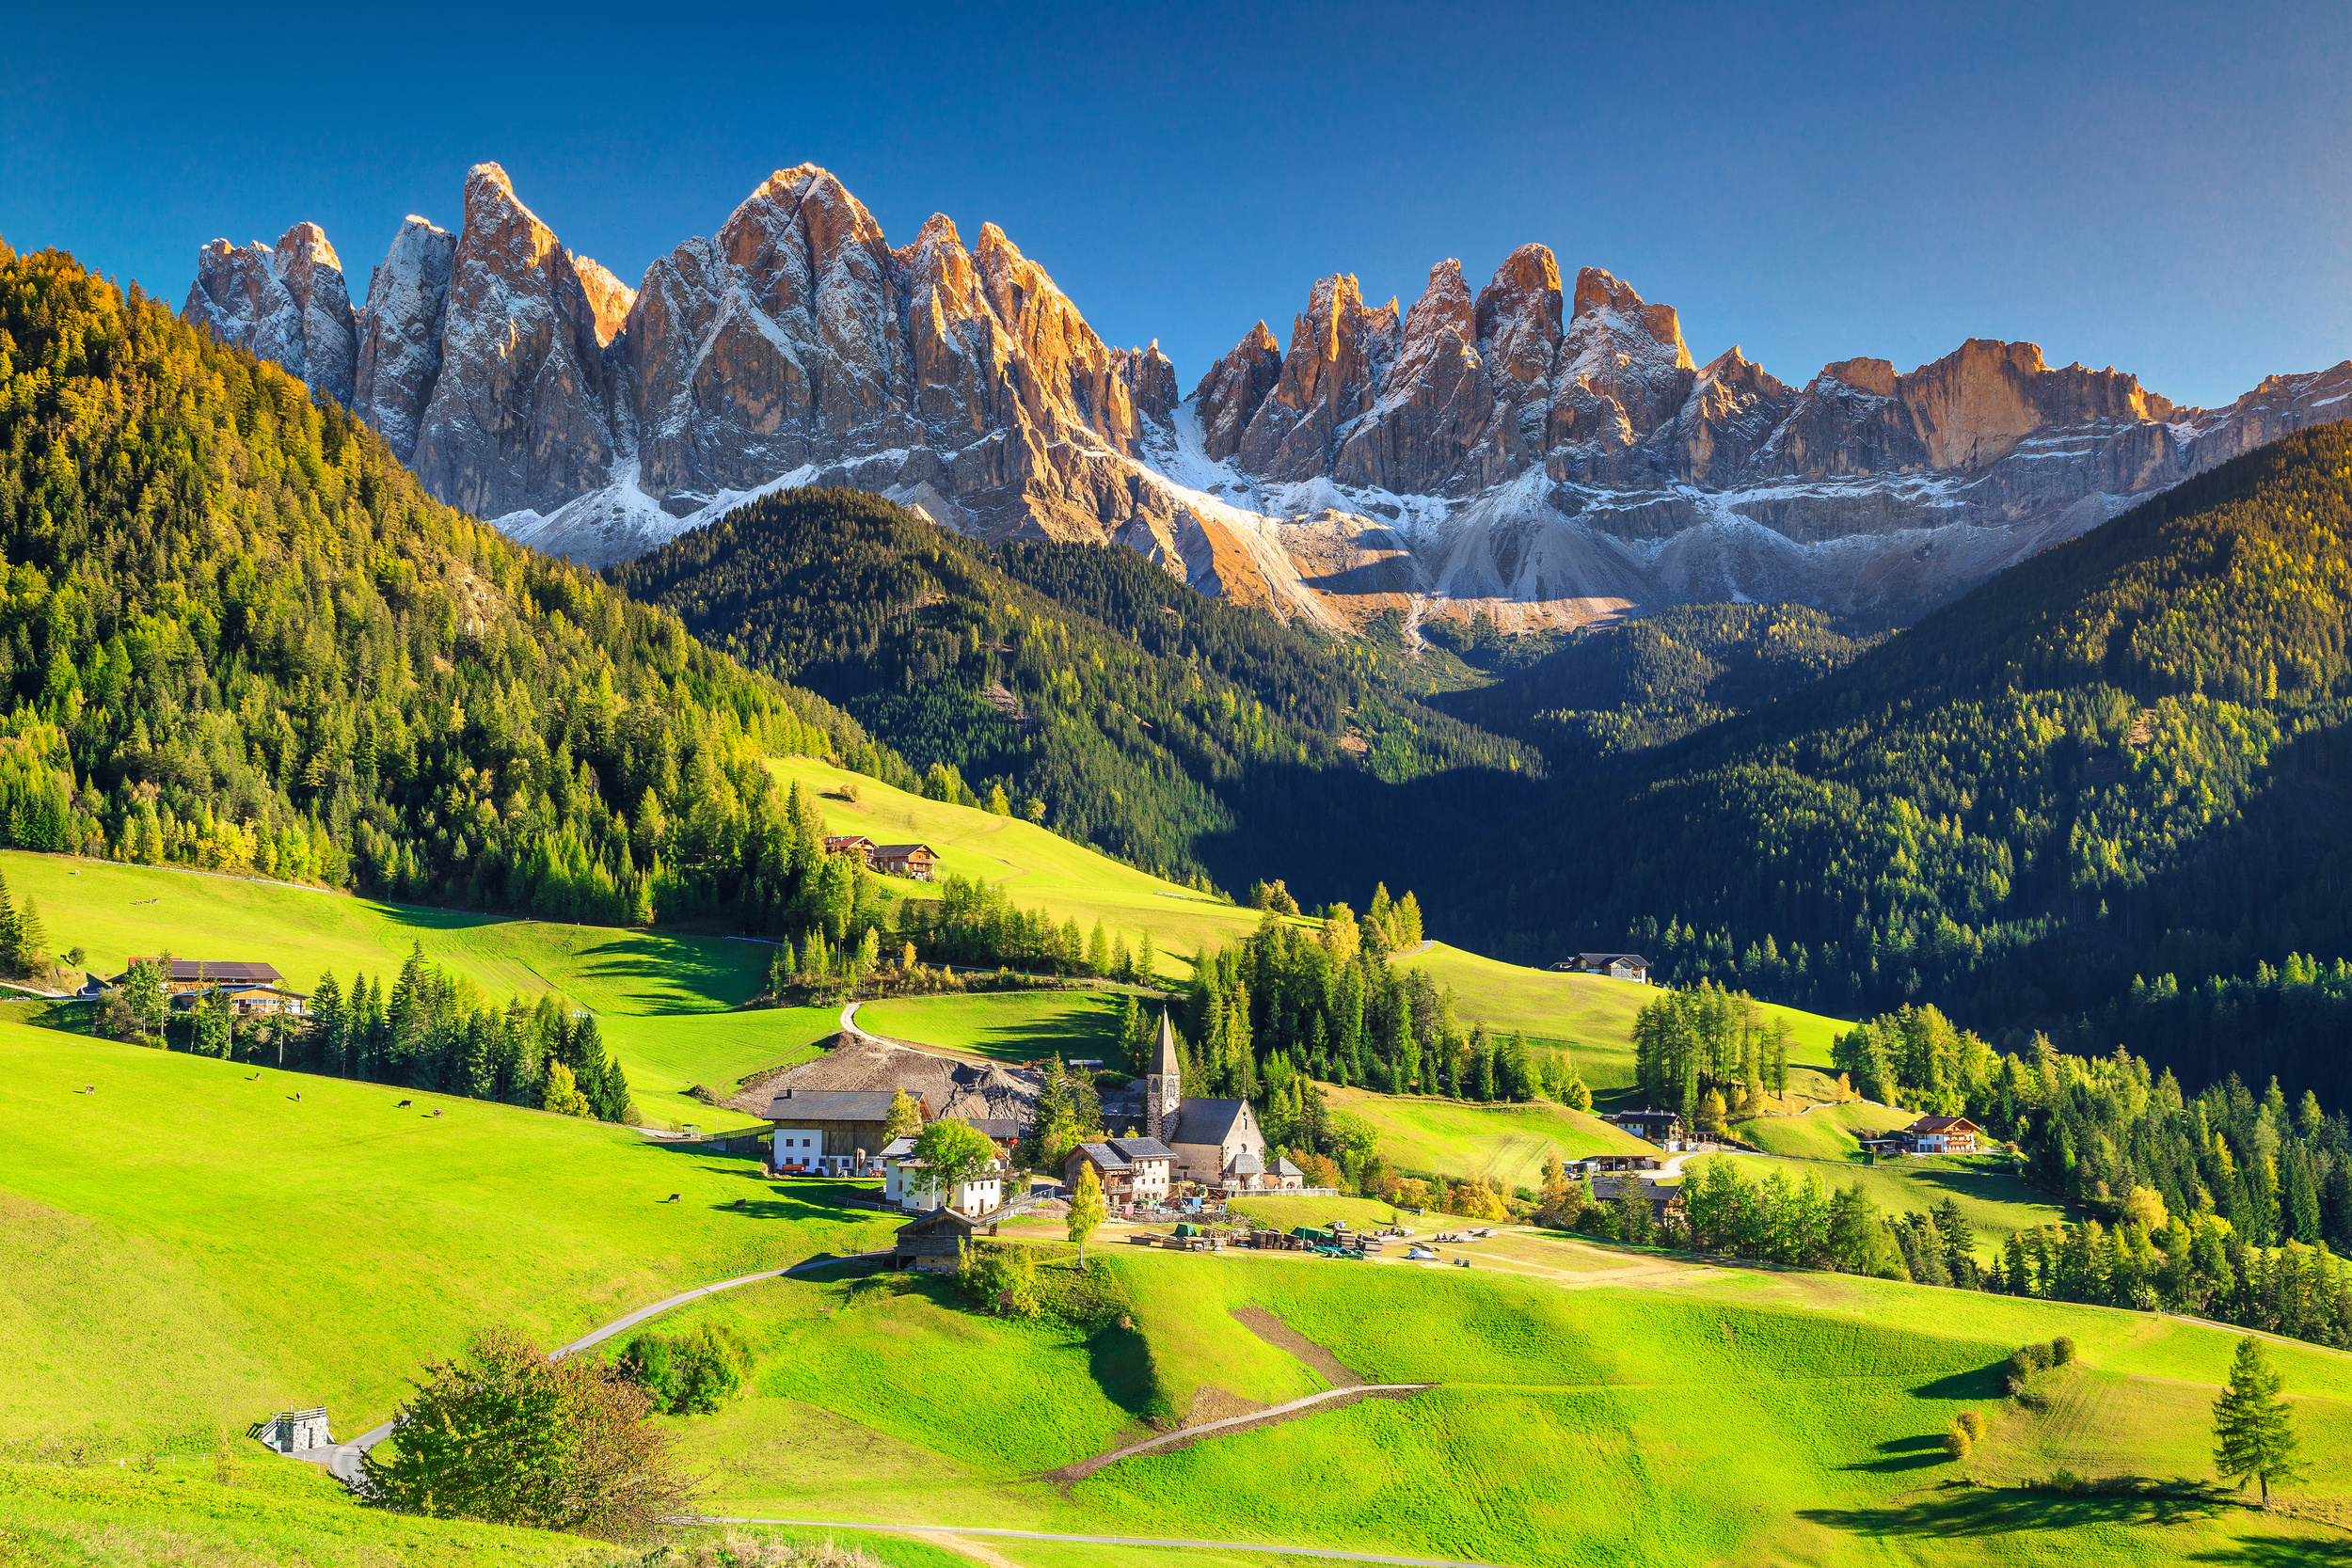 <p>Start in Milan and hit up all the major lakes in northern Italy, from glamorous Lake Como to less pretentious but still lovely Lake Garda and Lake Maggiore, plus plenty of other small ones. You’ll delight in the Italian mountain scenery!</p><p>You may also like: <a href='https://www.yardbarker.com/lifestyle/articles/22_of_the_warmest_destinations_around_the_world_in_winter_for_your_escape_021824/s1__39674589'>22 of the warmest destinations around the world in winter for your escape</a></p>